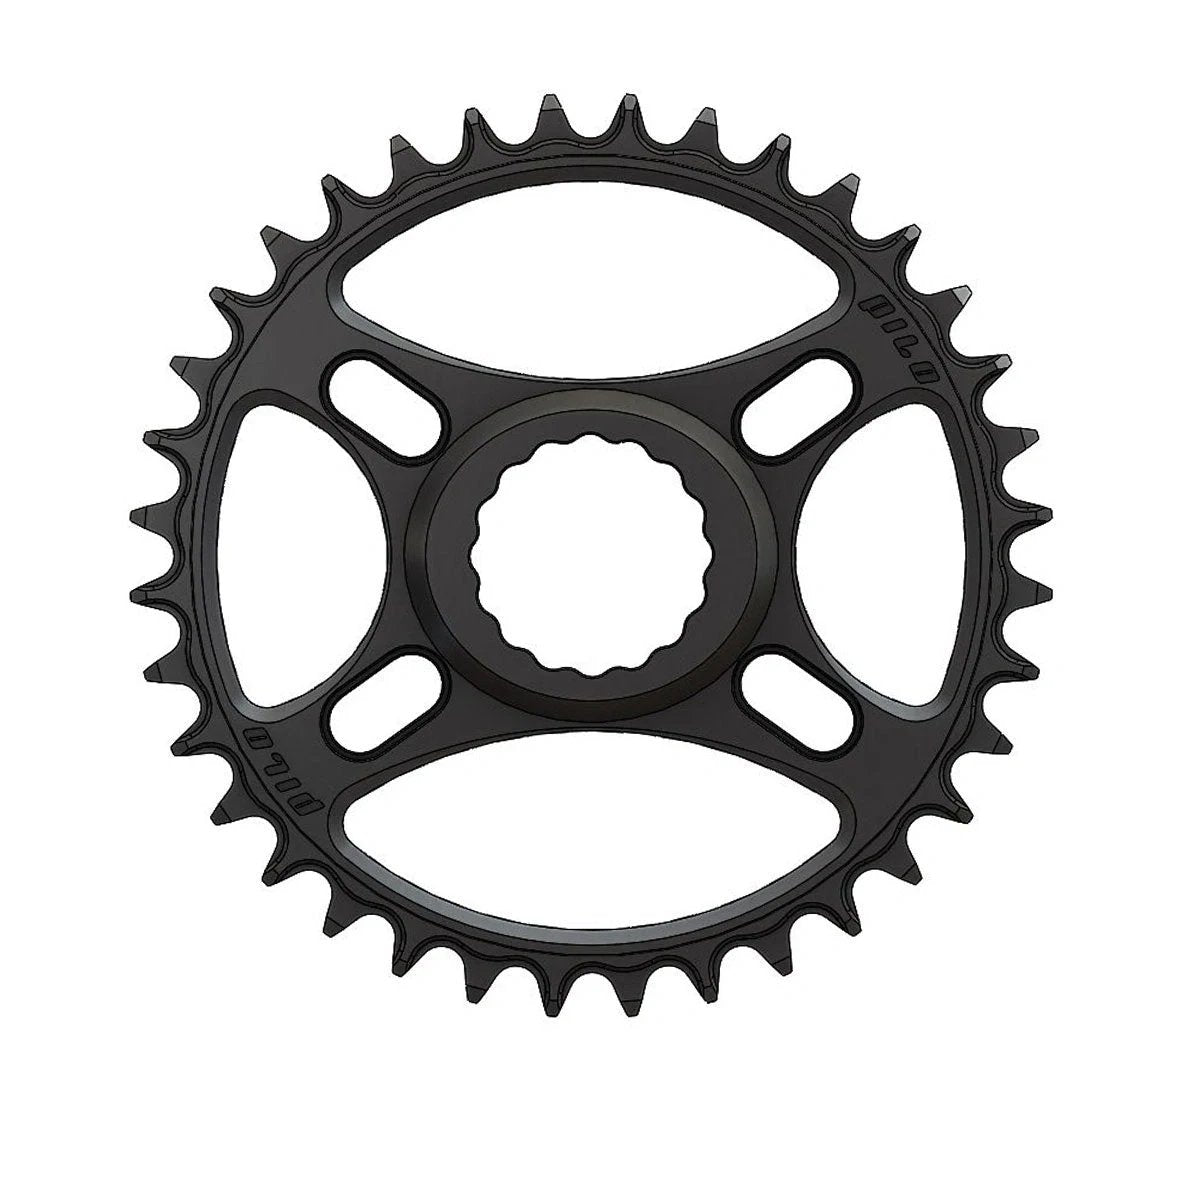 Pilo 36T Race Nw Chainring For Cranks - Chain Rings Upgrade